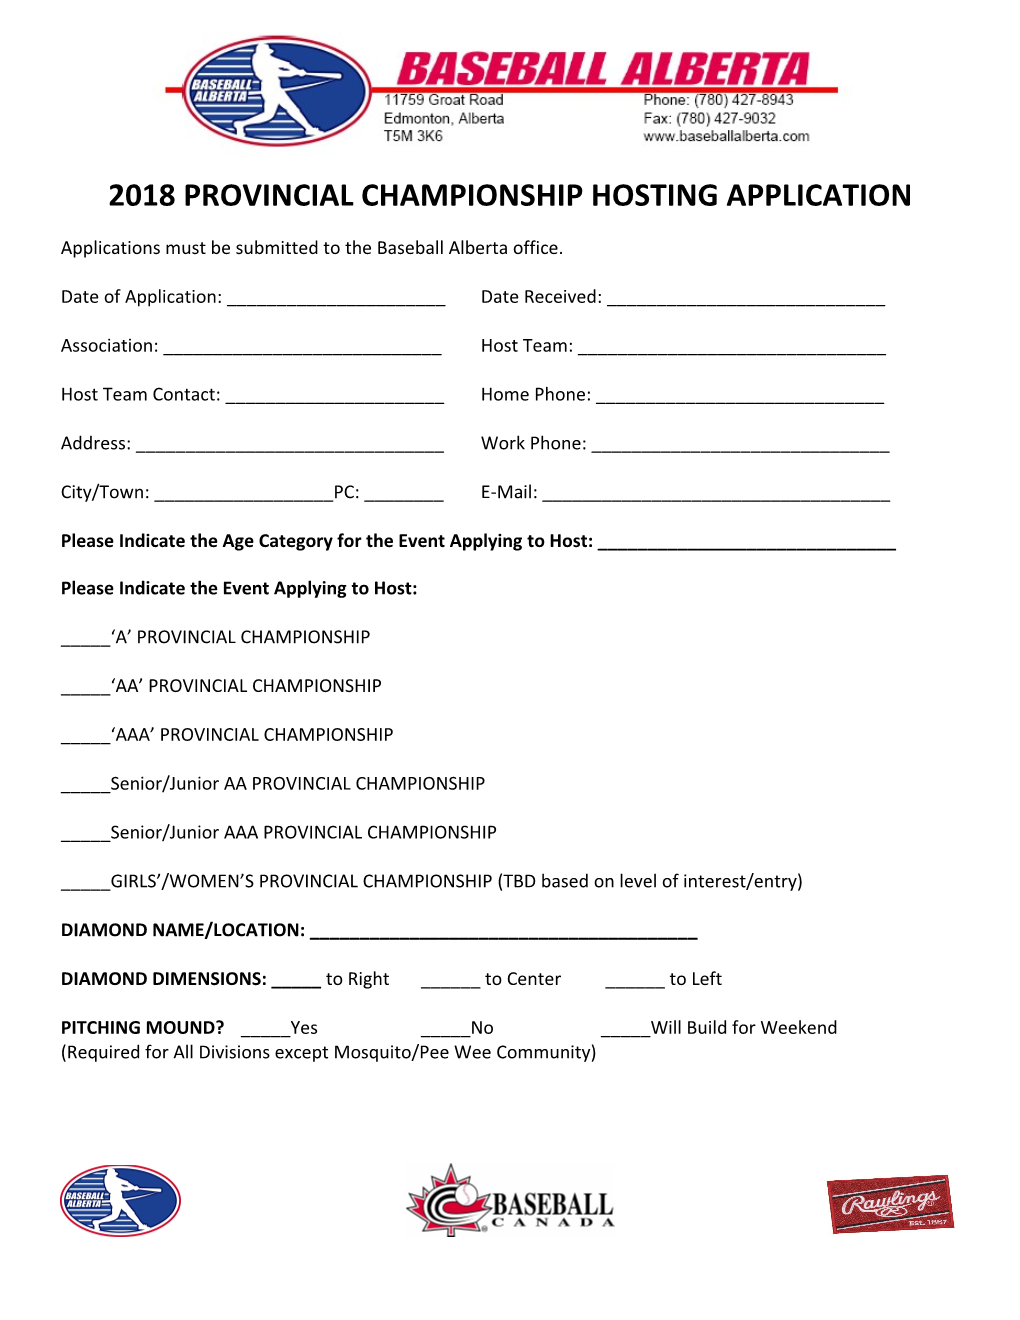 Round Robin/Provincial Host Application